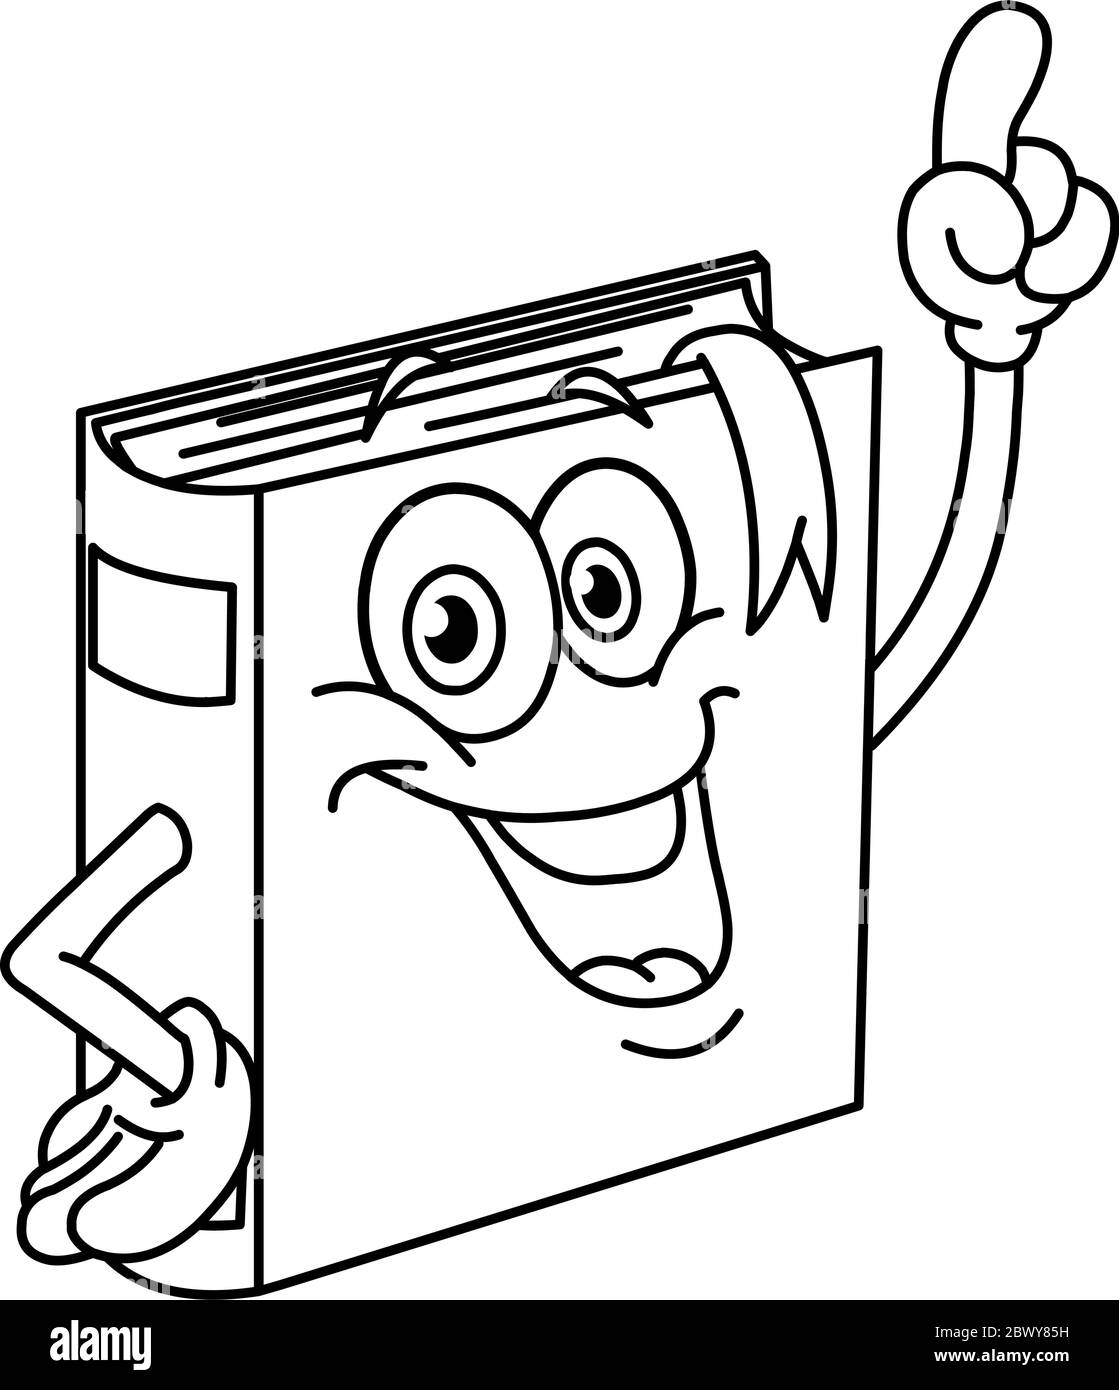 Outlined book cartoon pointing with his finger. Vector illustration coloring page. Stock Vector